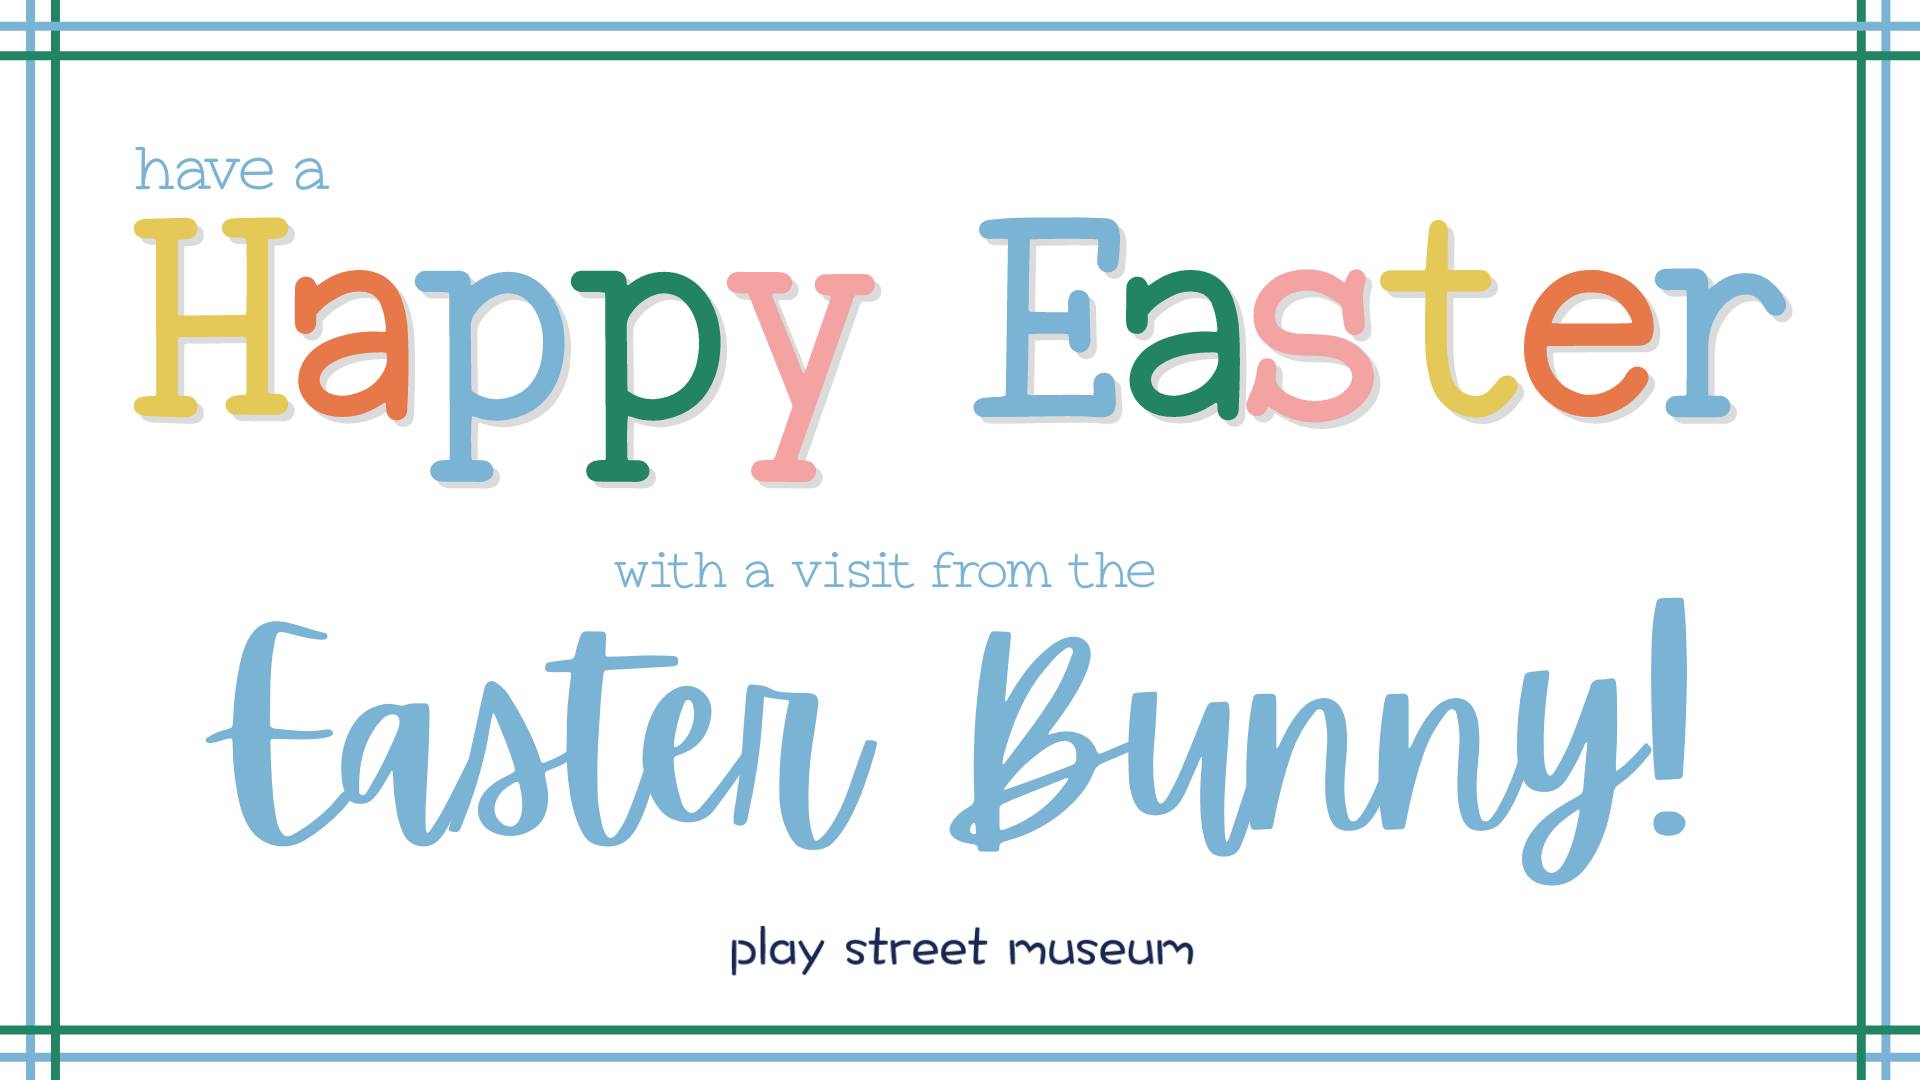 Happy Easter Play St Museum Plano Facebook Image